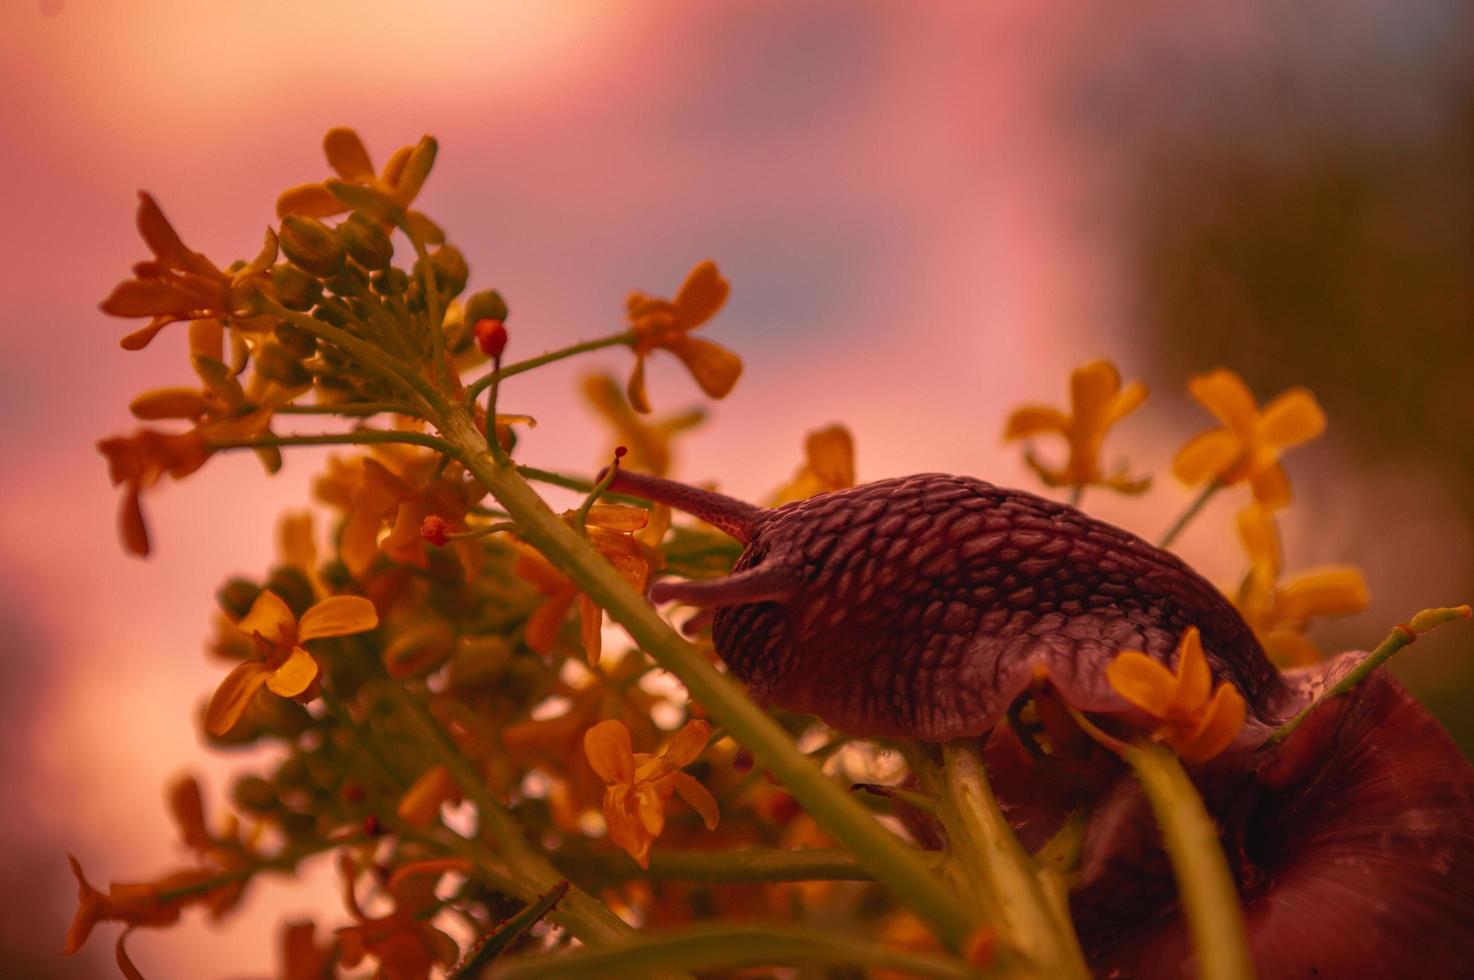 Burgundy snail at sunset in dark red colors and in a natural environment photo